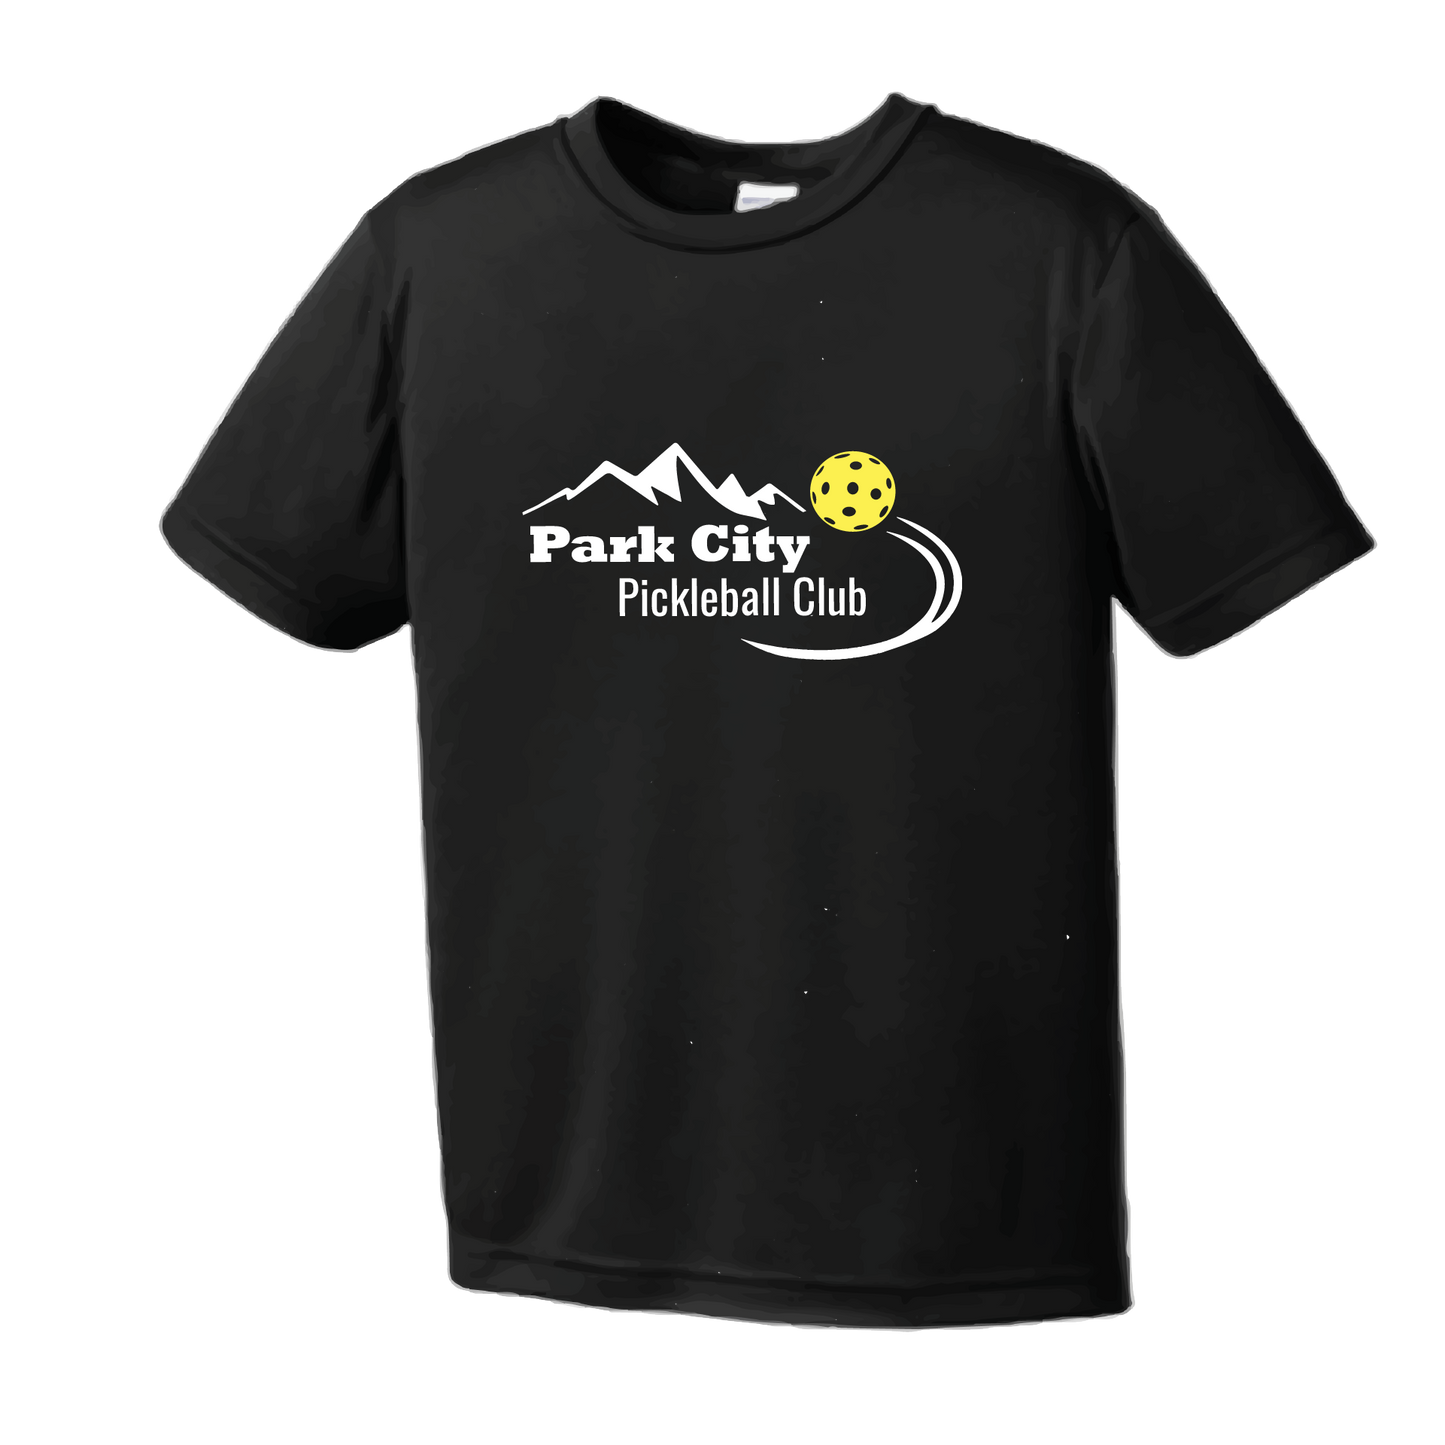 Pickleball Design: Park City Pickleball Club (White Words)  Youth Style: Short Sleeve  Shirts are lightweight, roomy and highly breathable. These moisture-wicking shirts are designed for athletic performance. They feature PosiCharge technology to lock in color and prevent logos from fading. Removable tag and set-in sleeves for comfort.